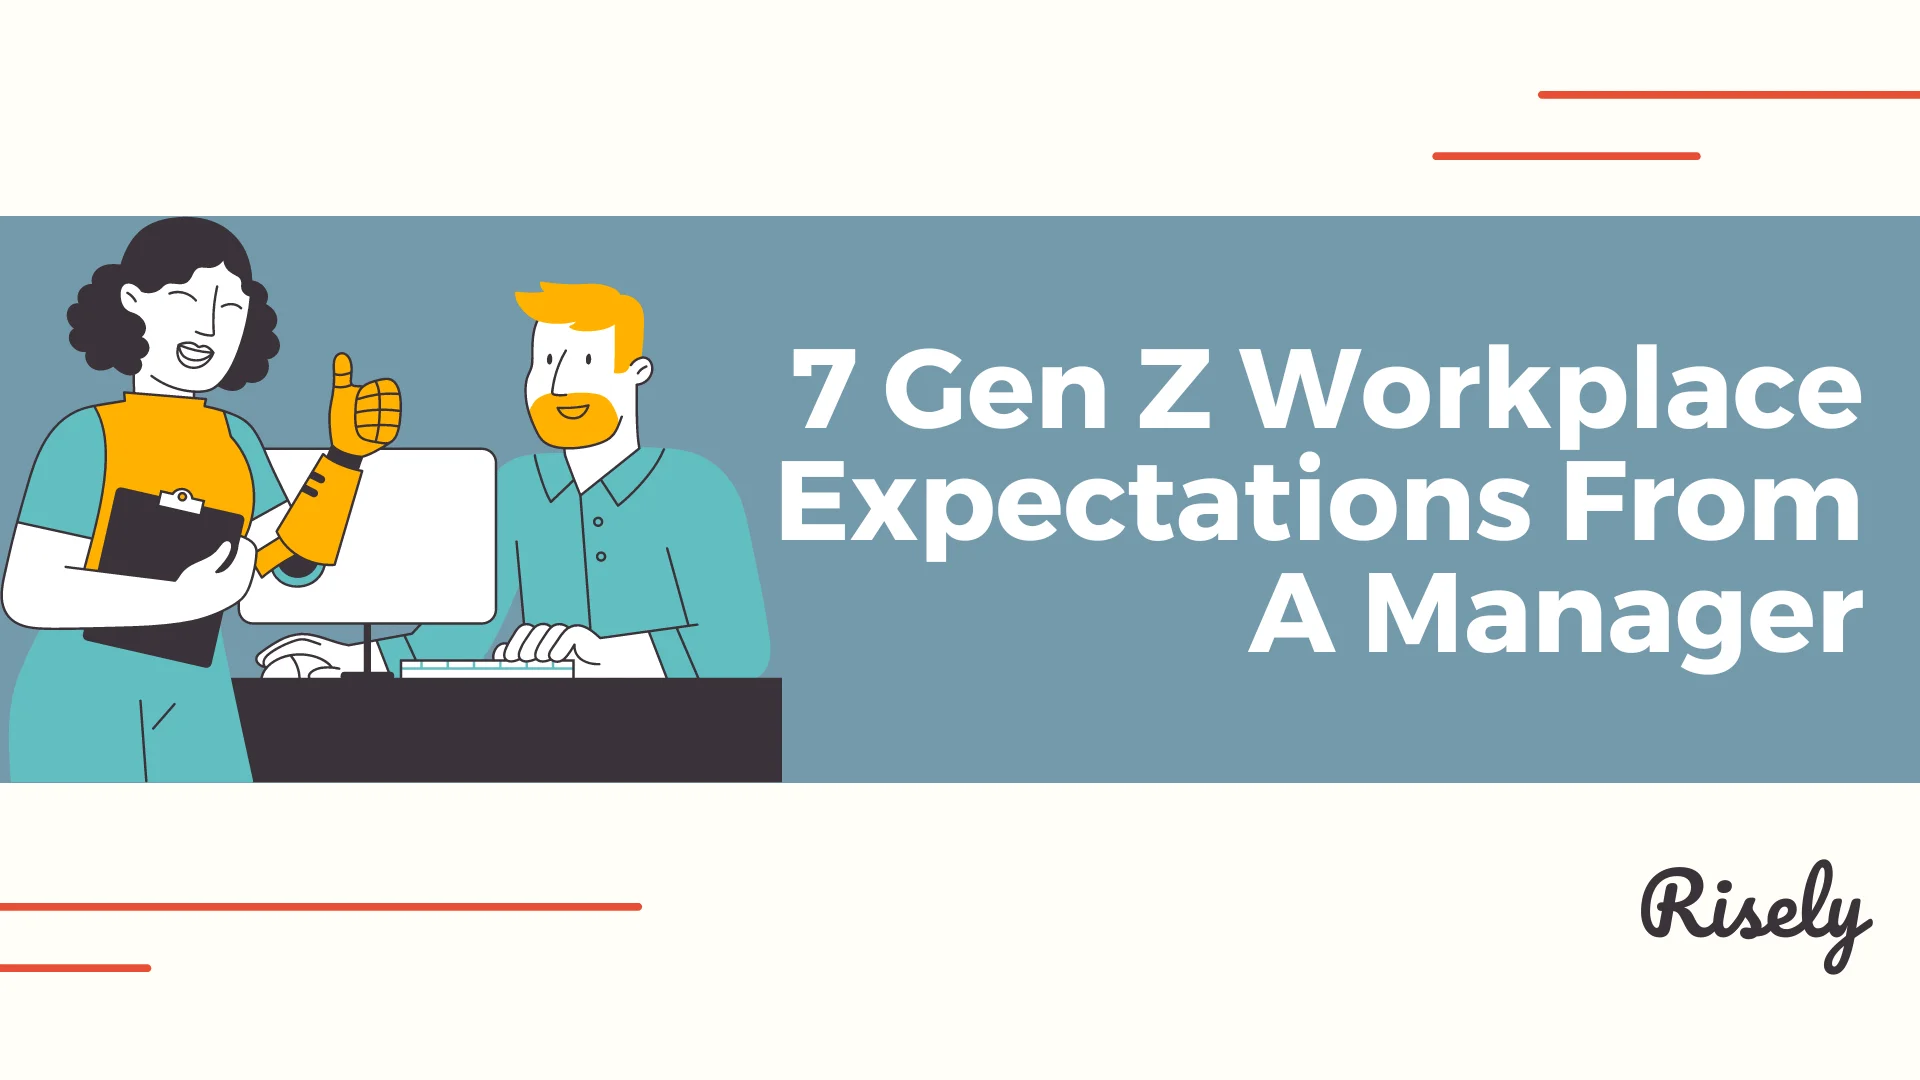 gen z workplace expectations